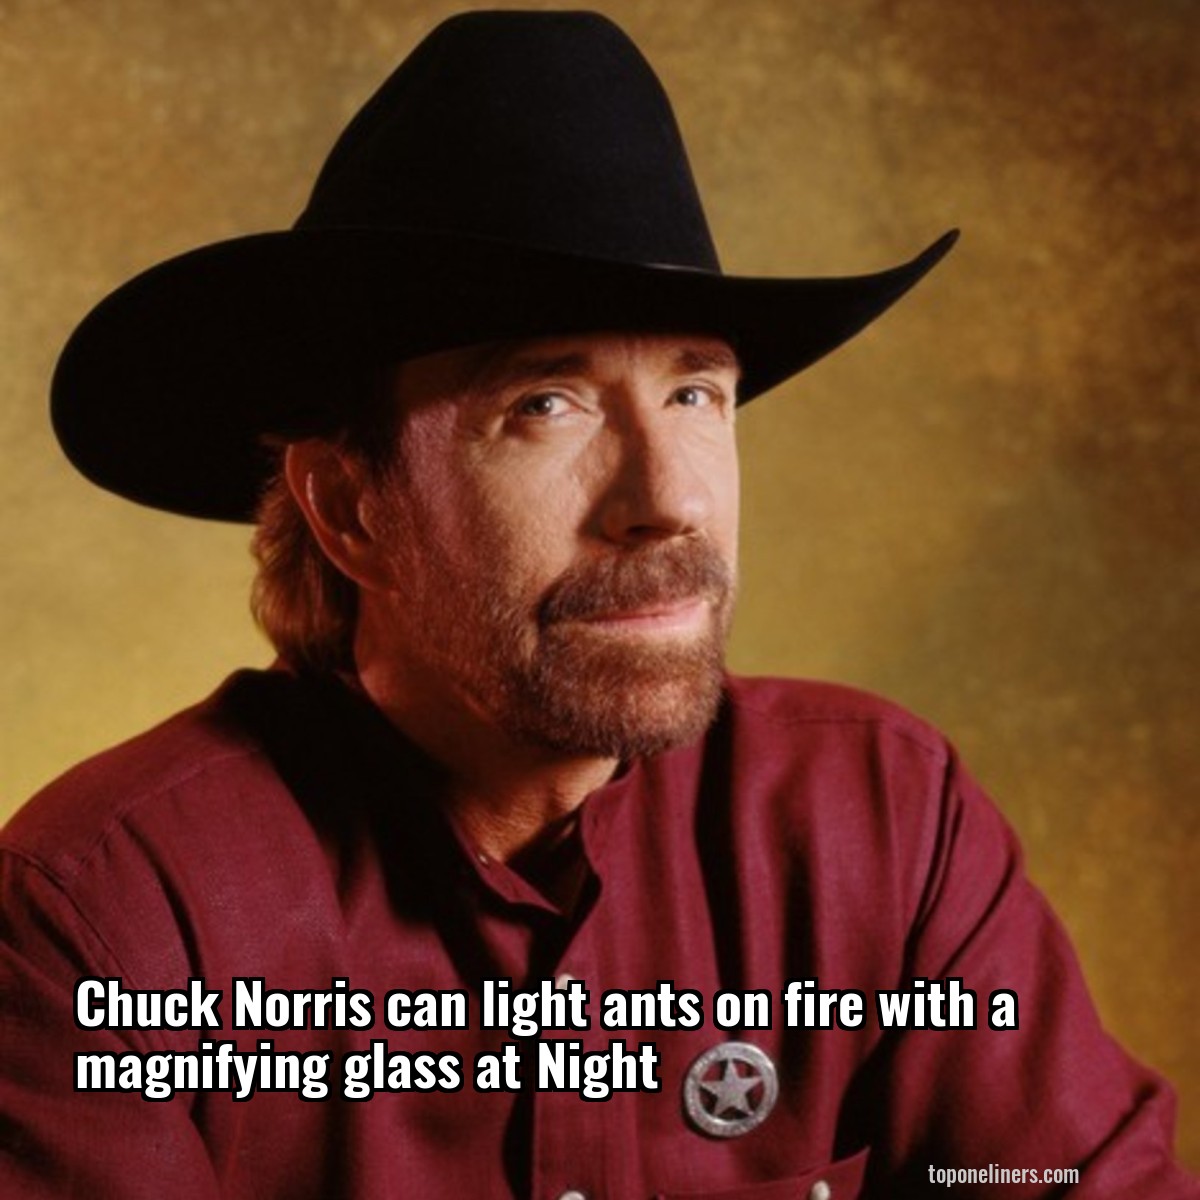 Chuck Norris can light ants on fire with a magnifying glass at Night